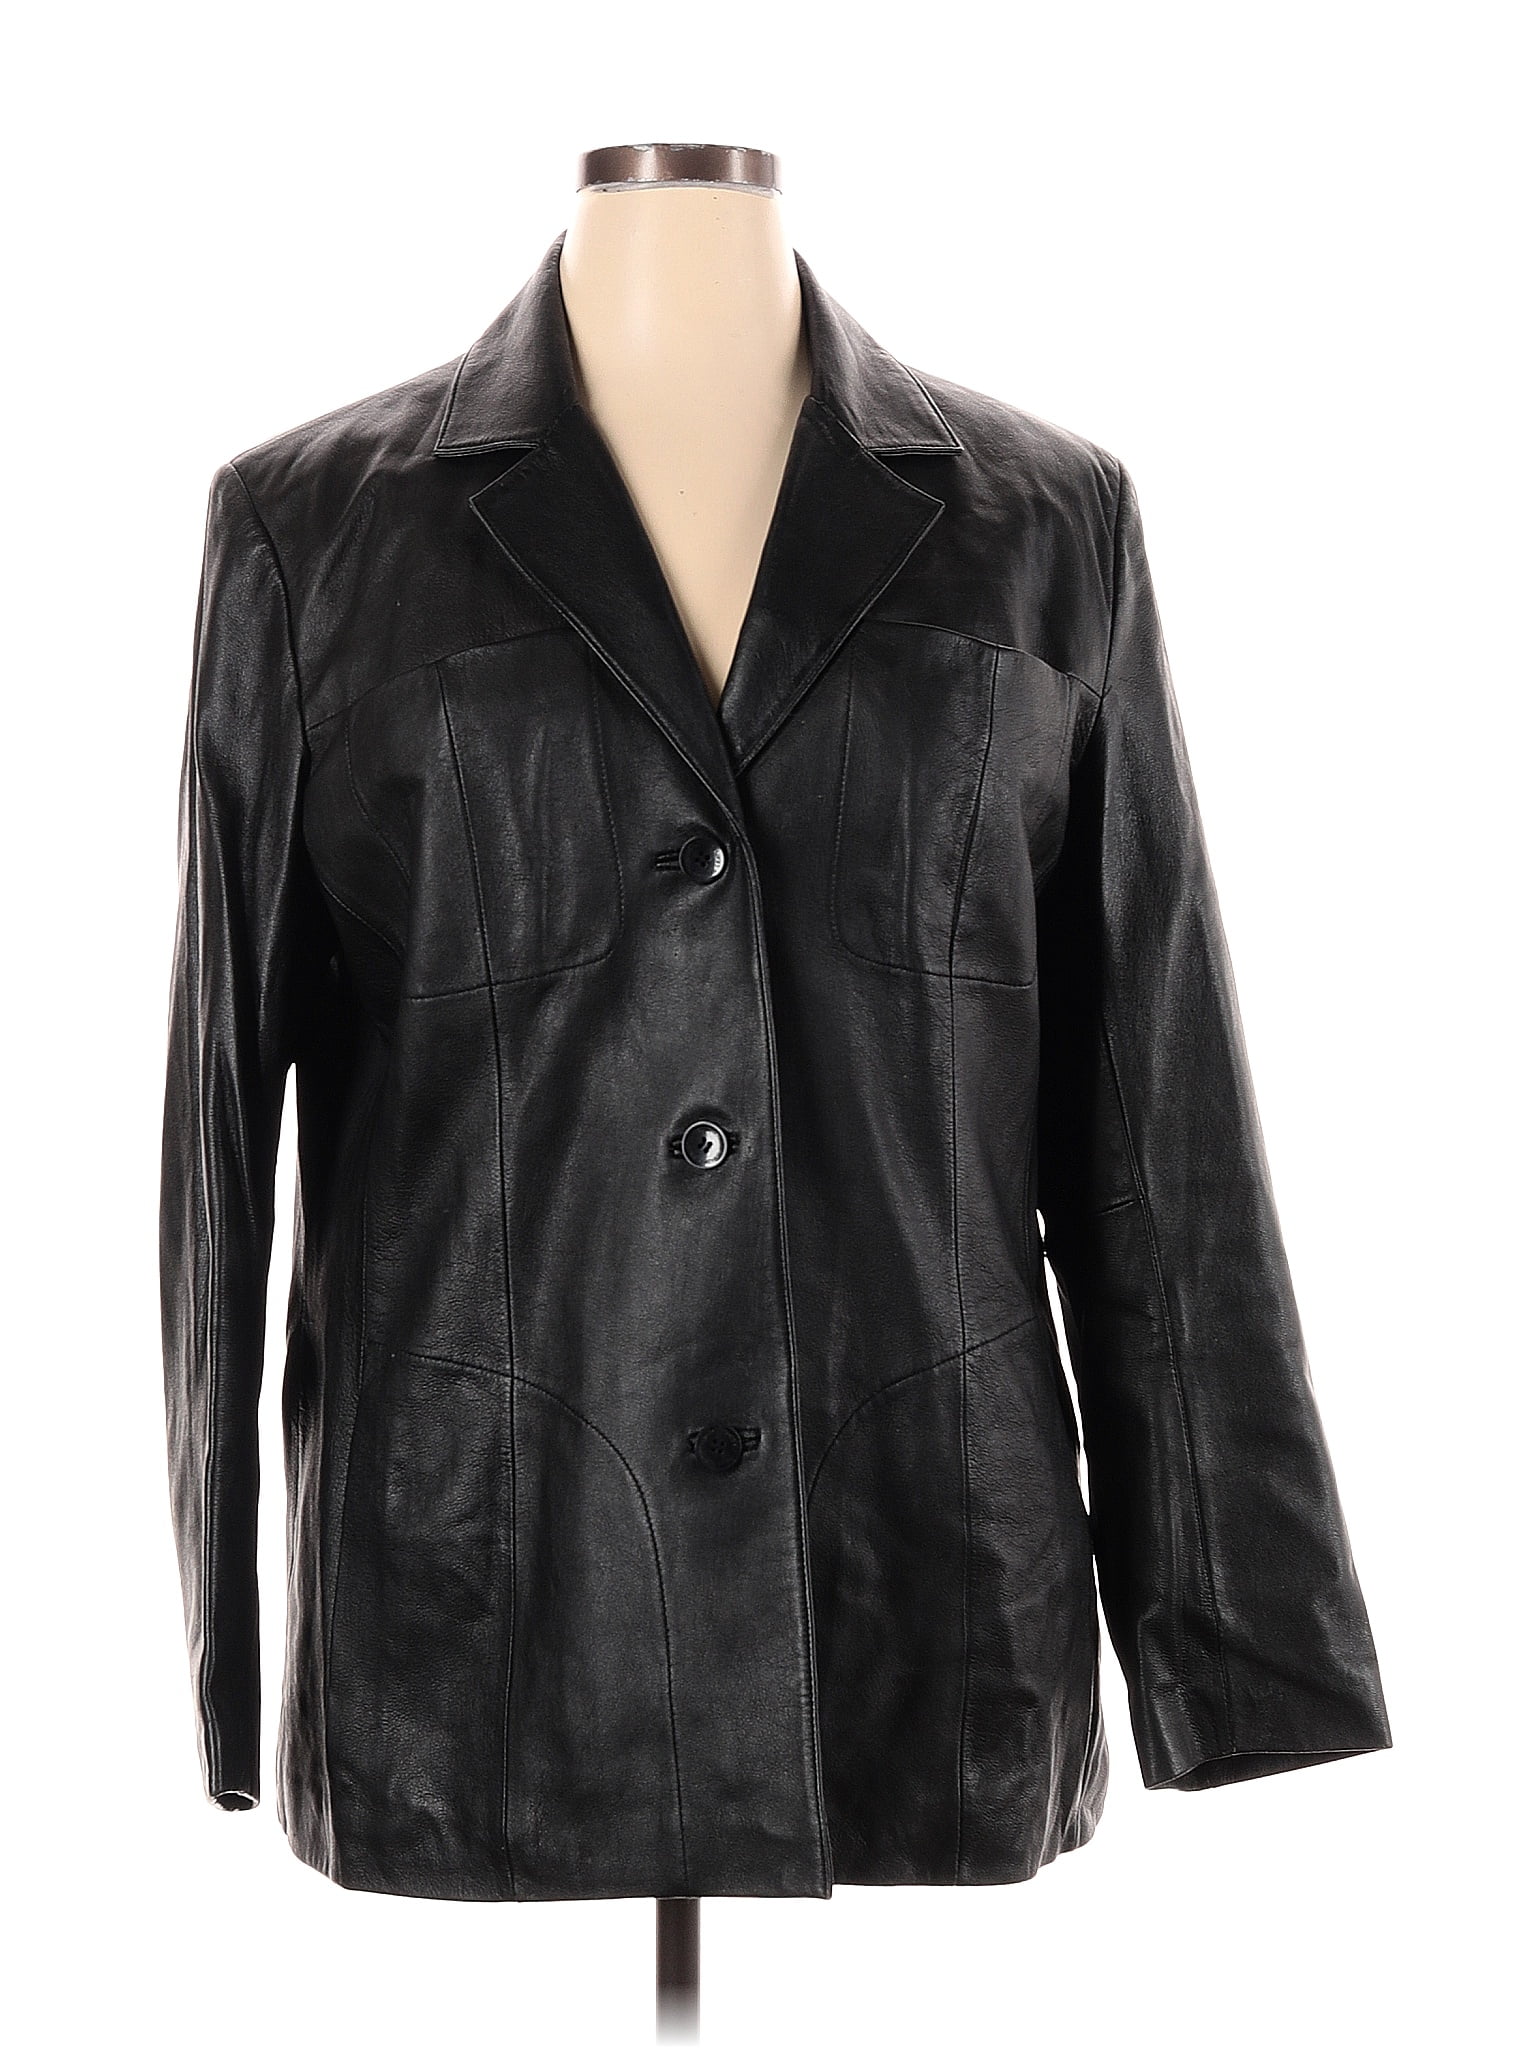 Wilsons Leather 100% Polyester Solid Black Leather Jacket Size 1X (Plus ...